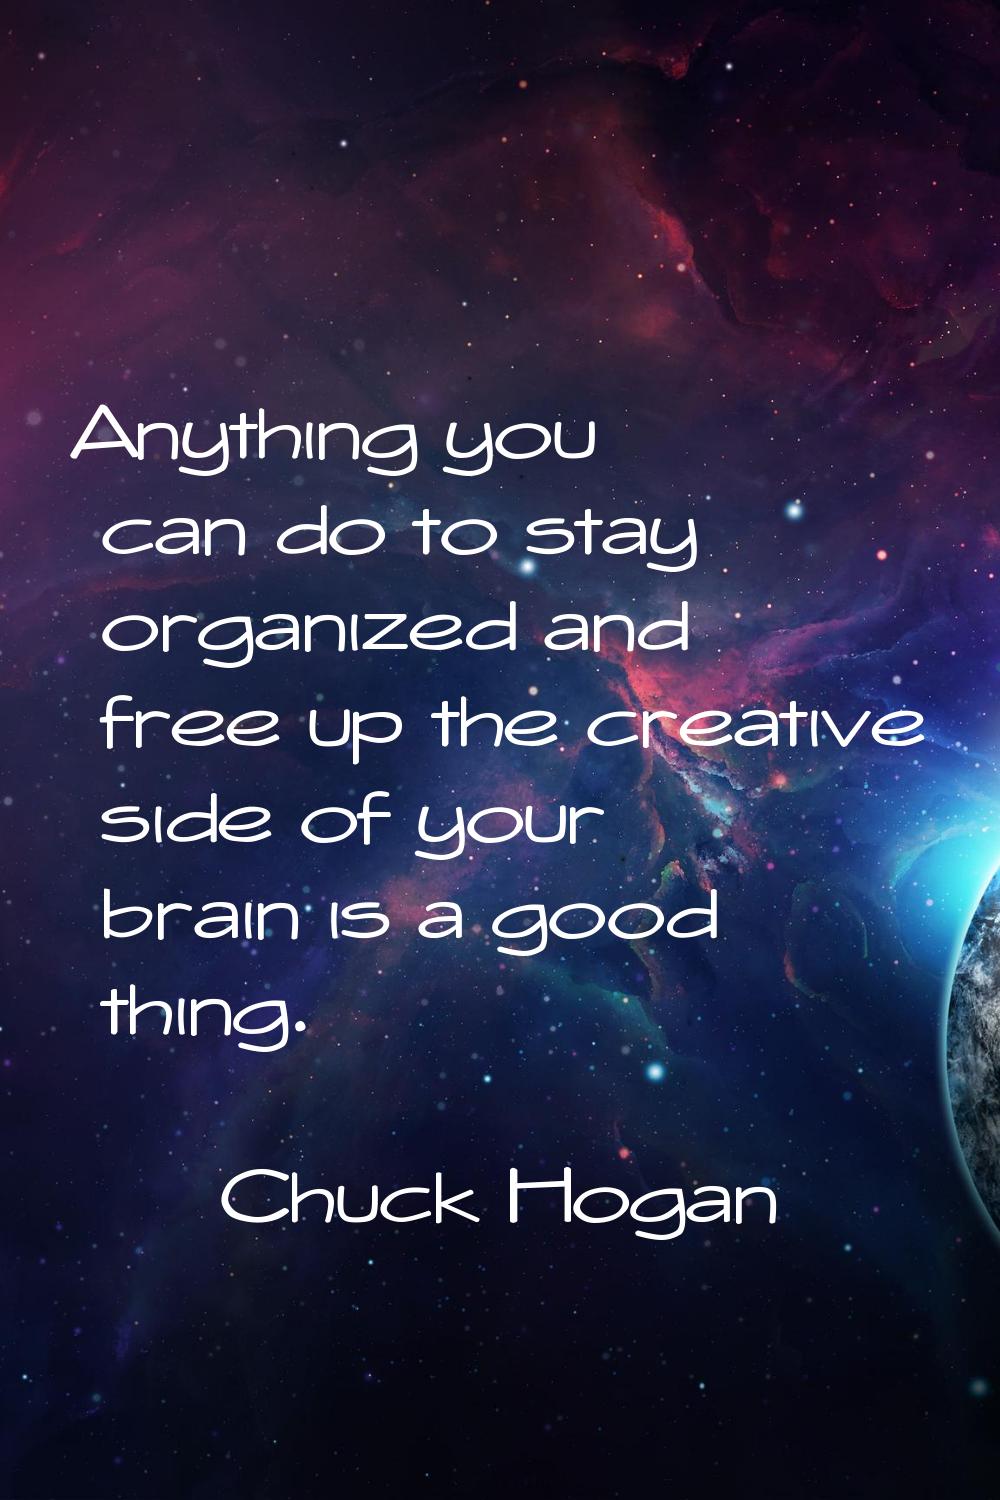 Anything you can do to stay organized and free up the creative side of your brain is a good thing.